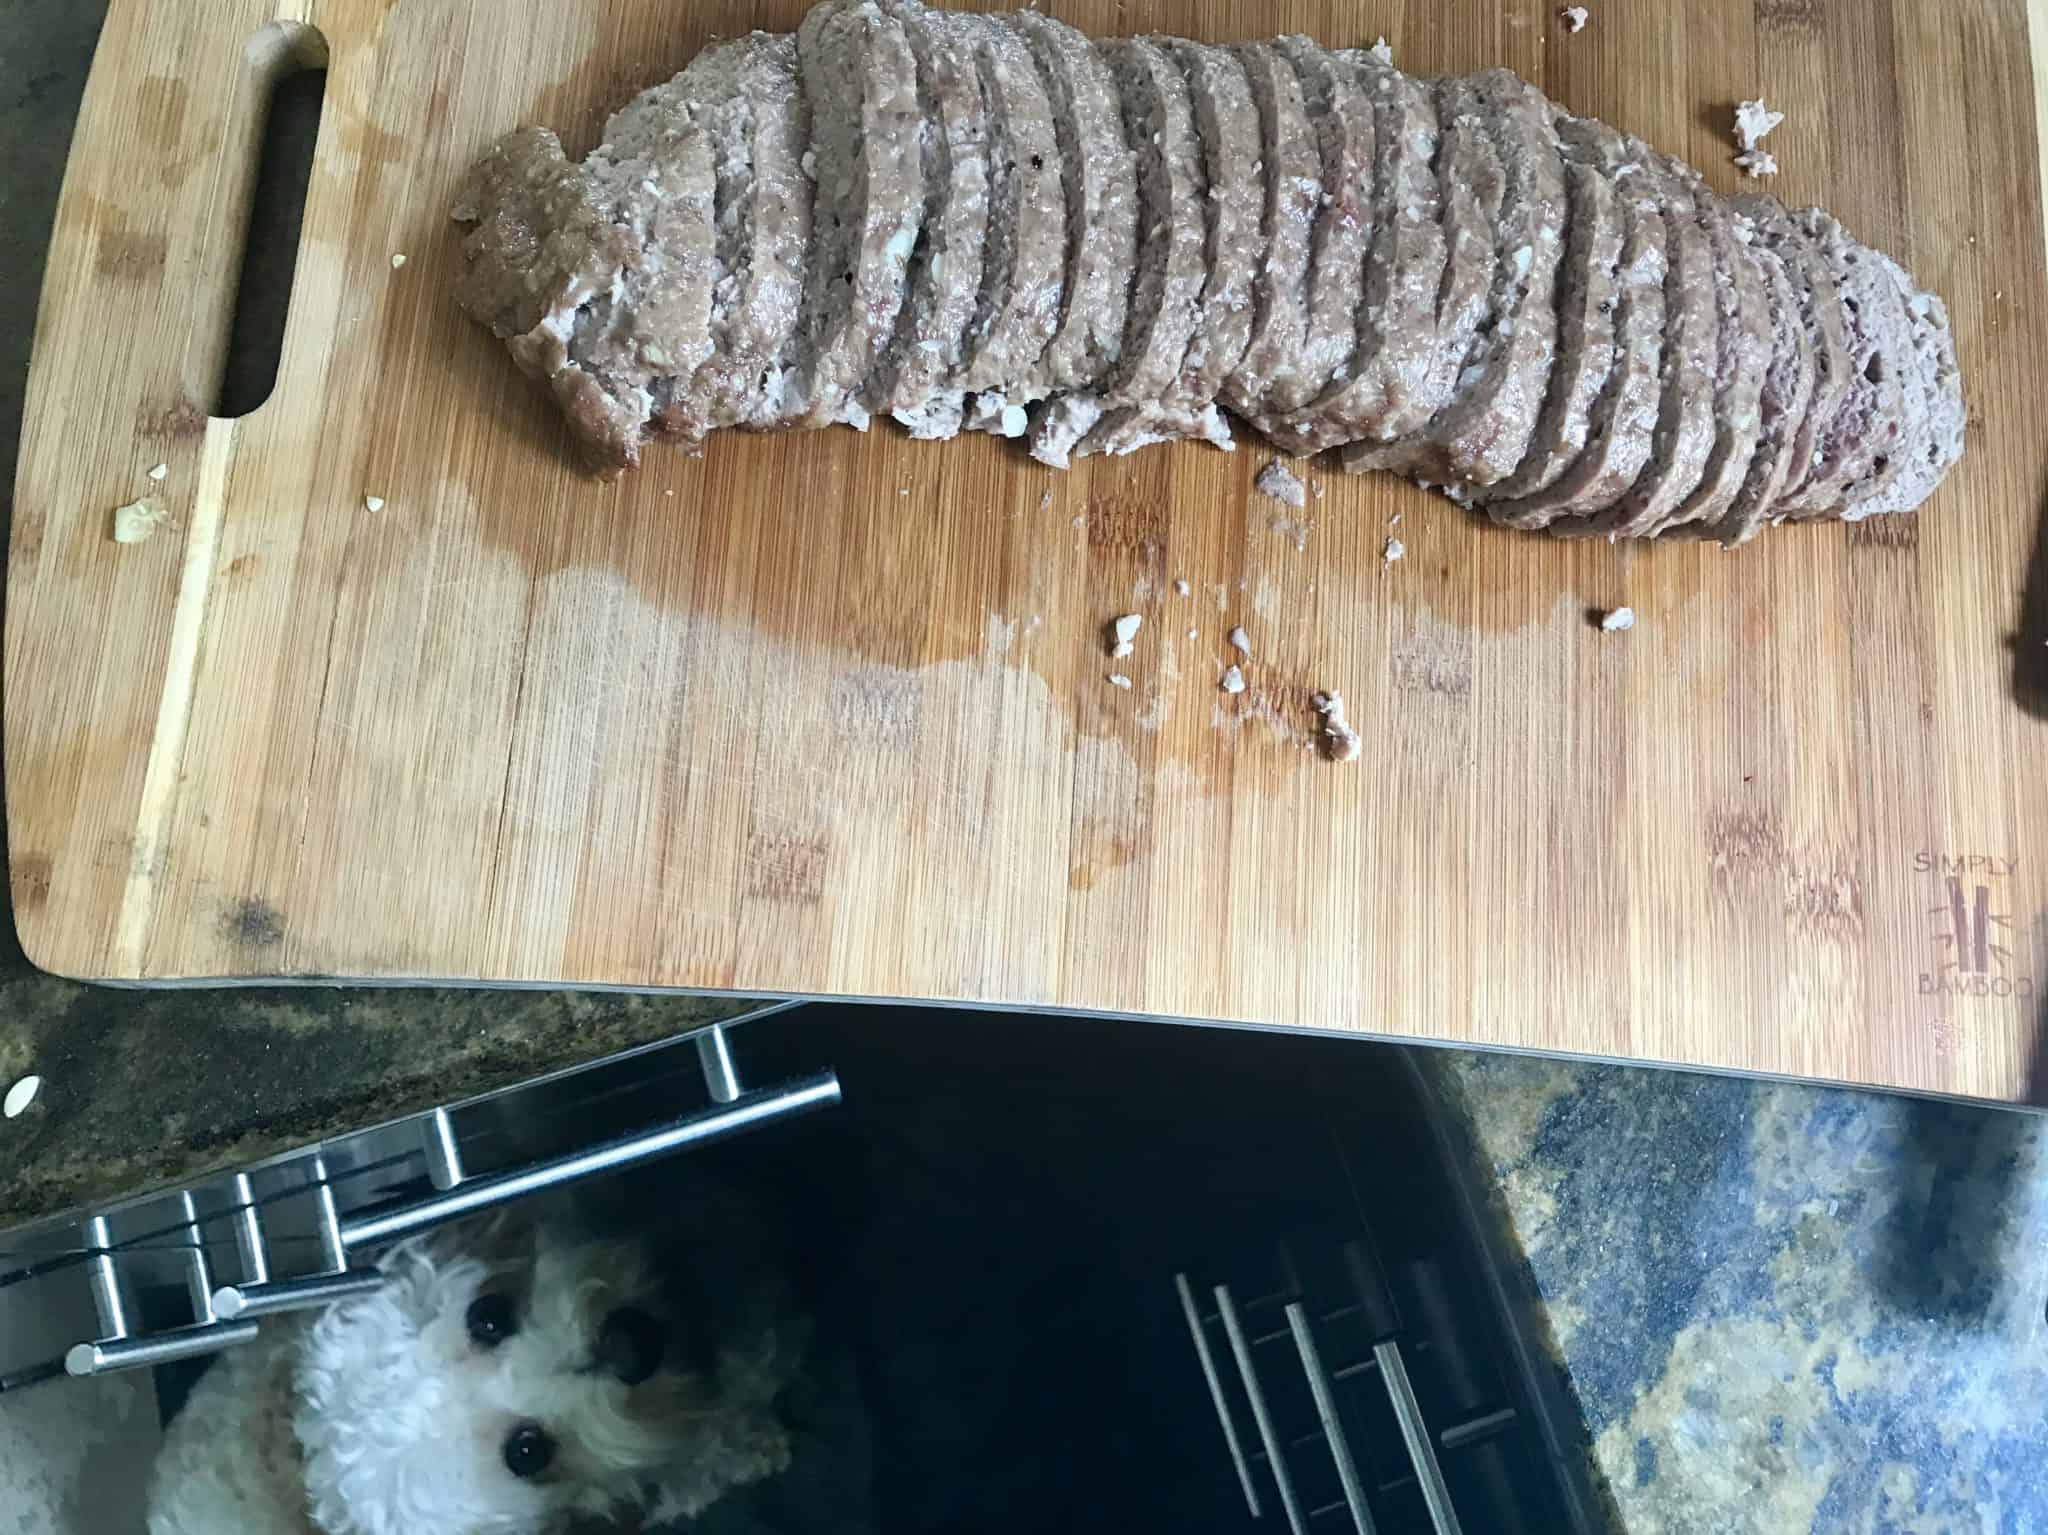 Gyro Meat sliced on cutting board with dog eyeing it